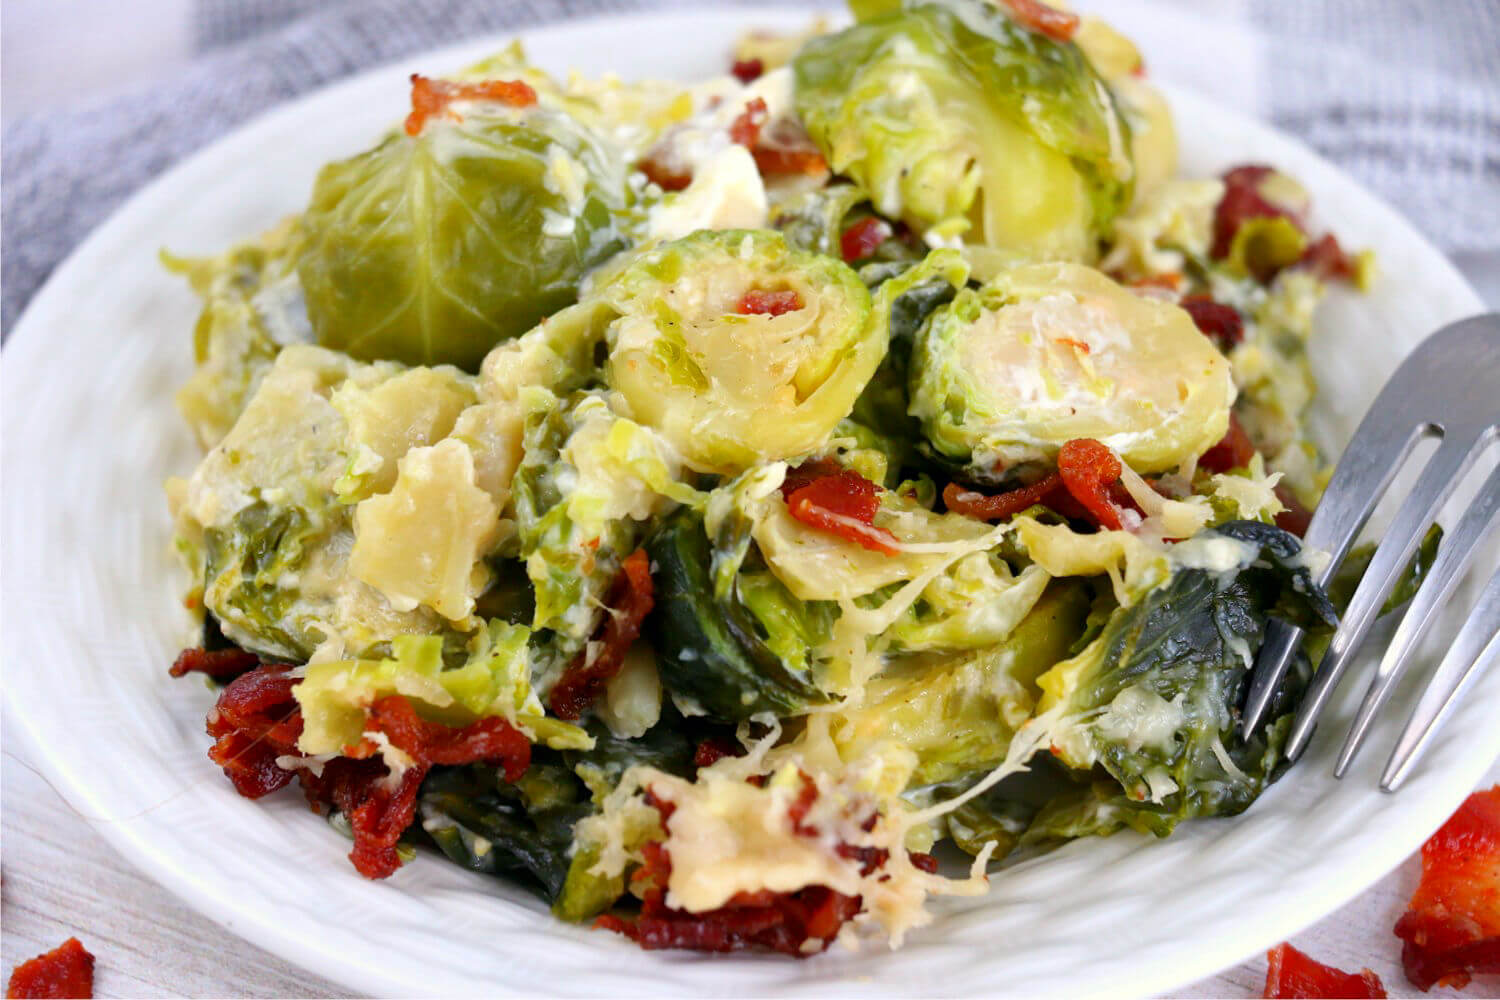 Creamy Brussel Sprouts with garlic